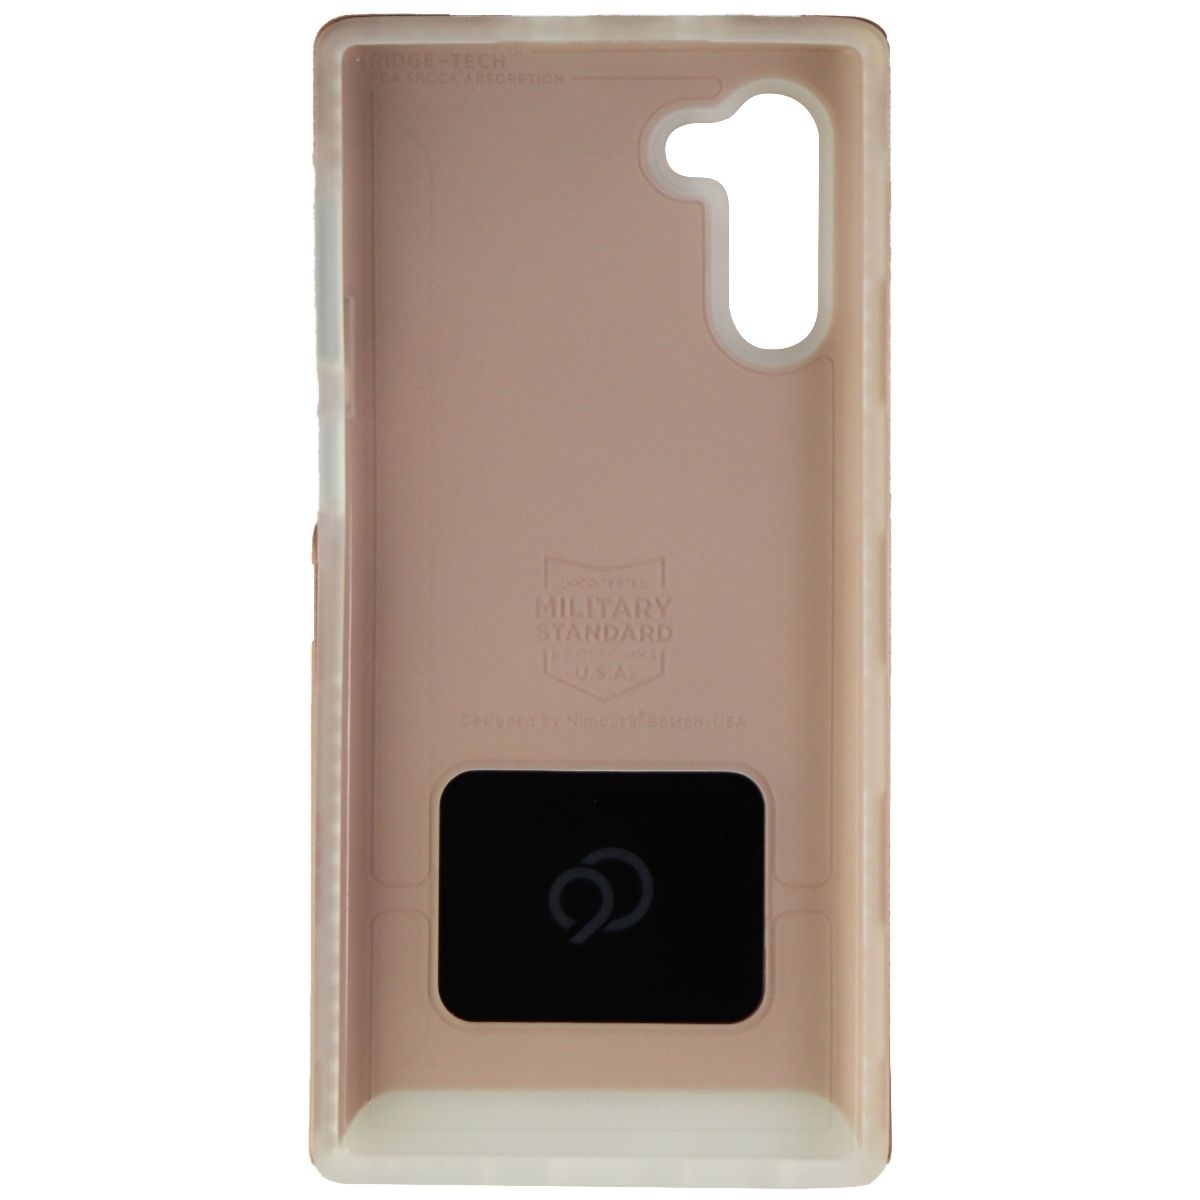 Nimbus9 Cirrus 2 Series Case For Samsung Galaxy Note10 - Rose Gold Clear/Frost